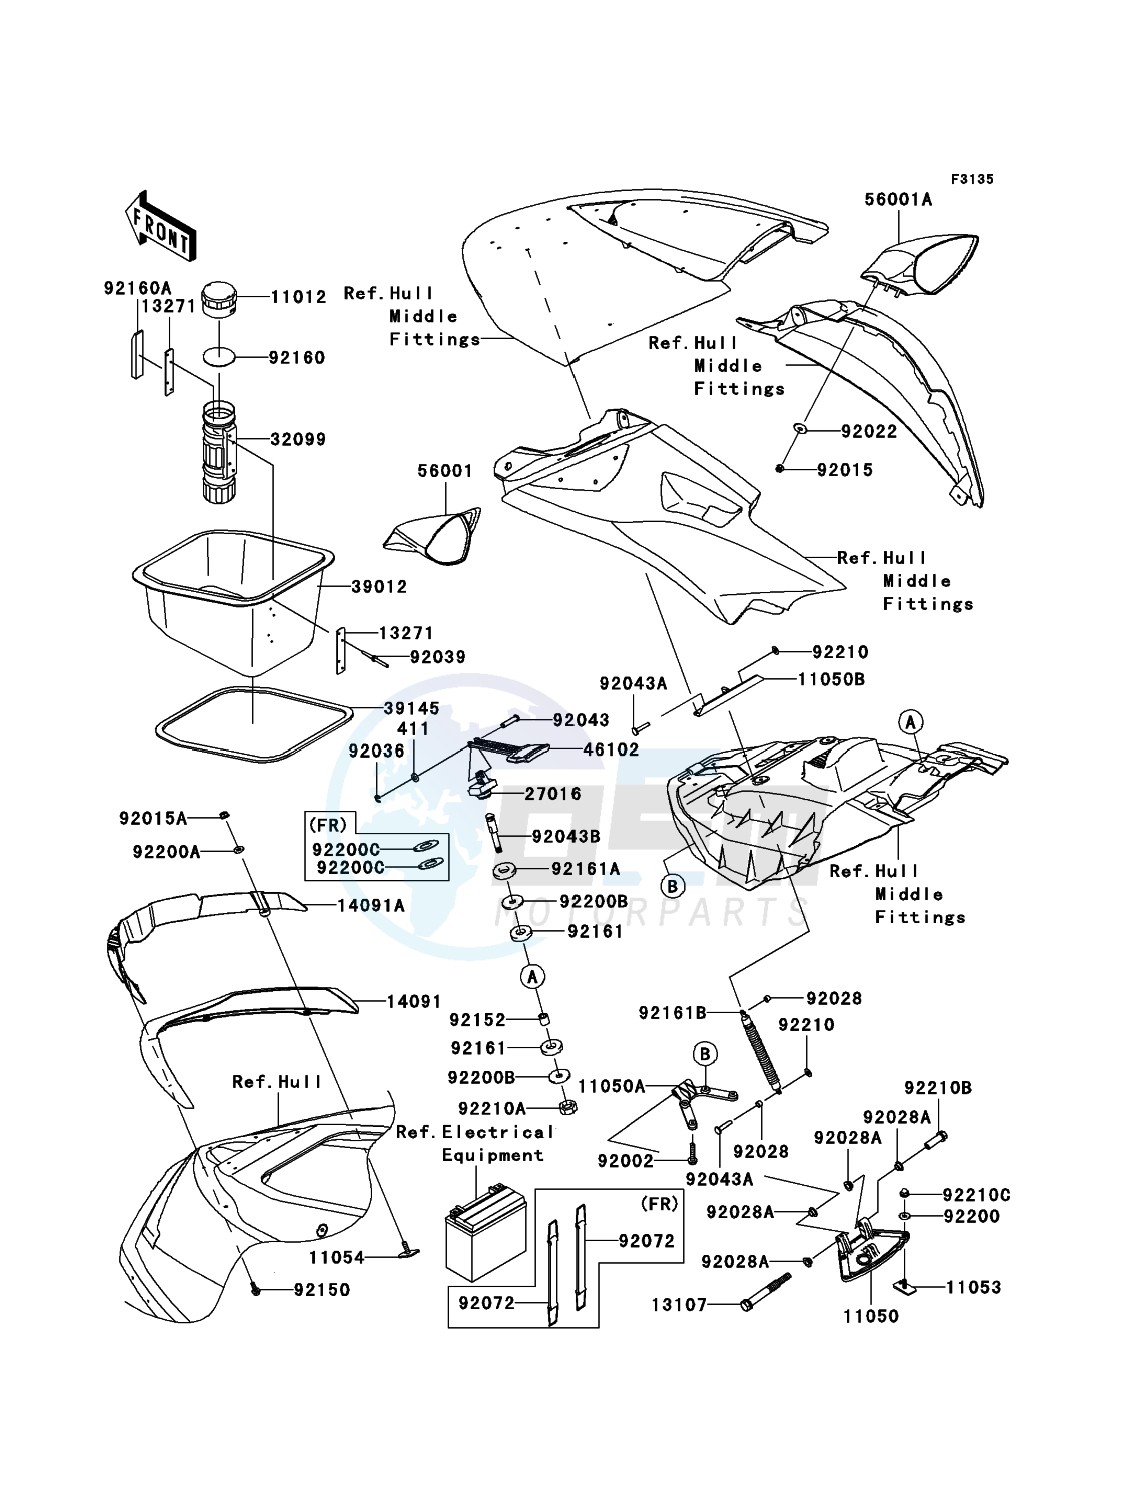 Hull Front Fittings blueprint